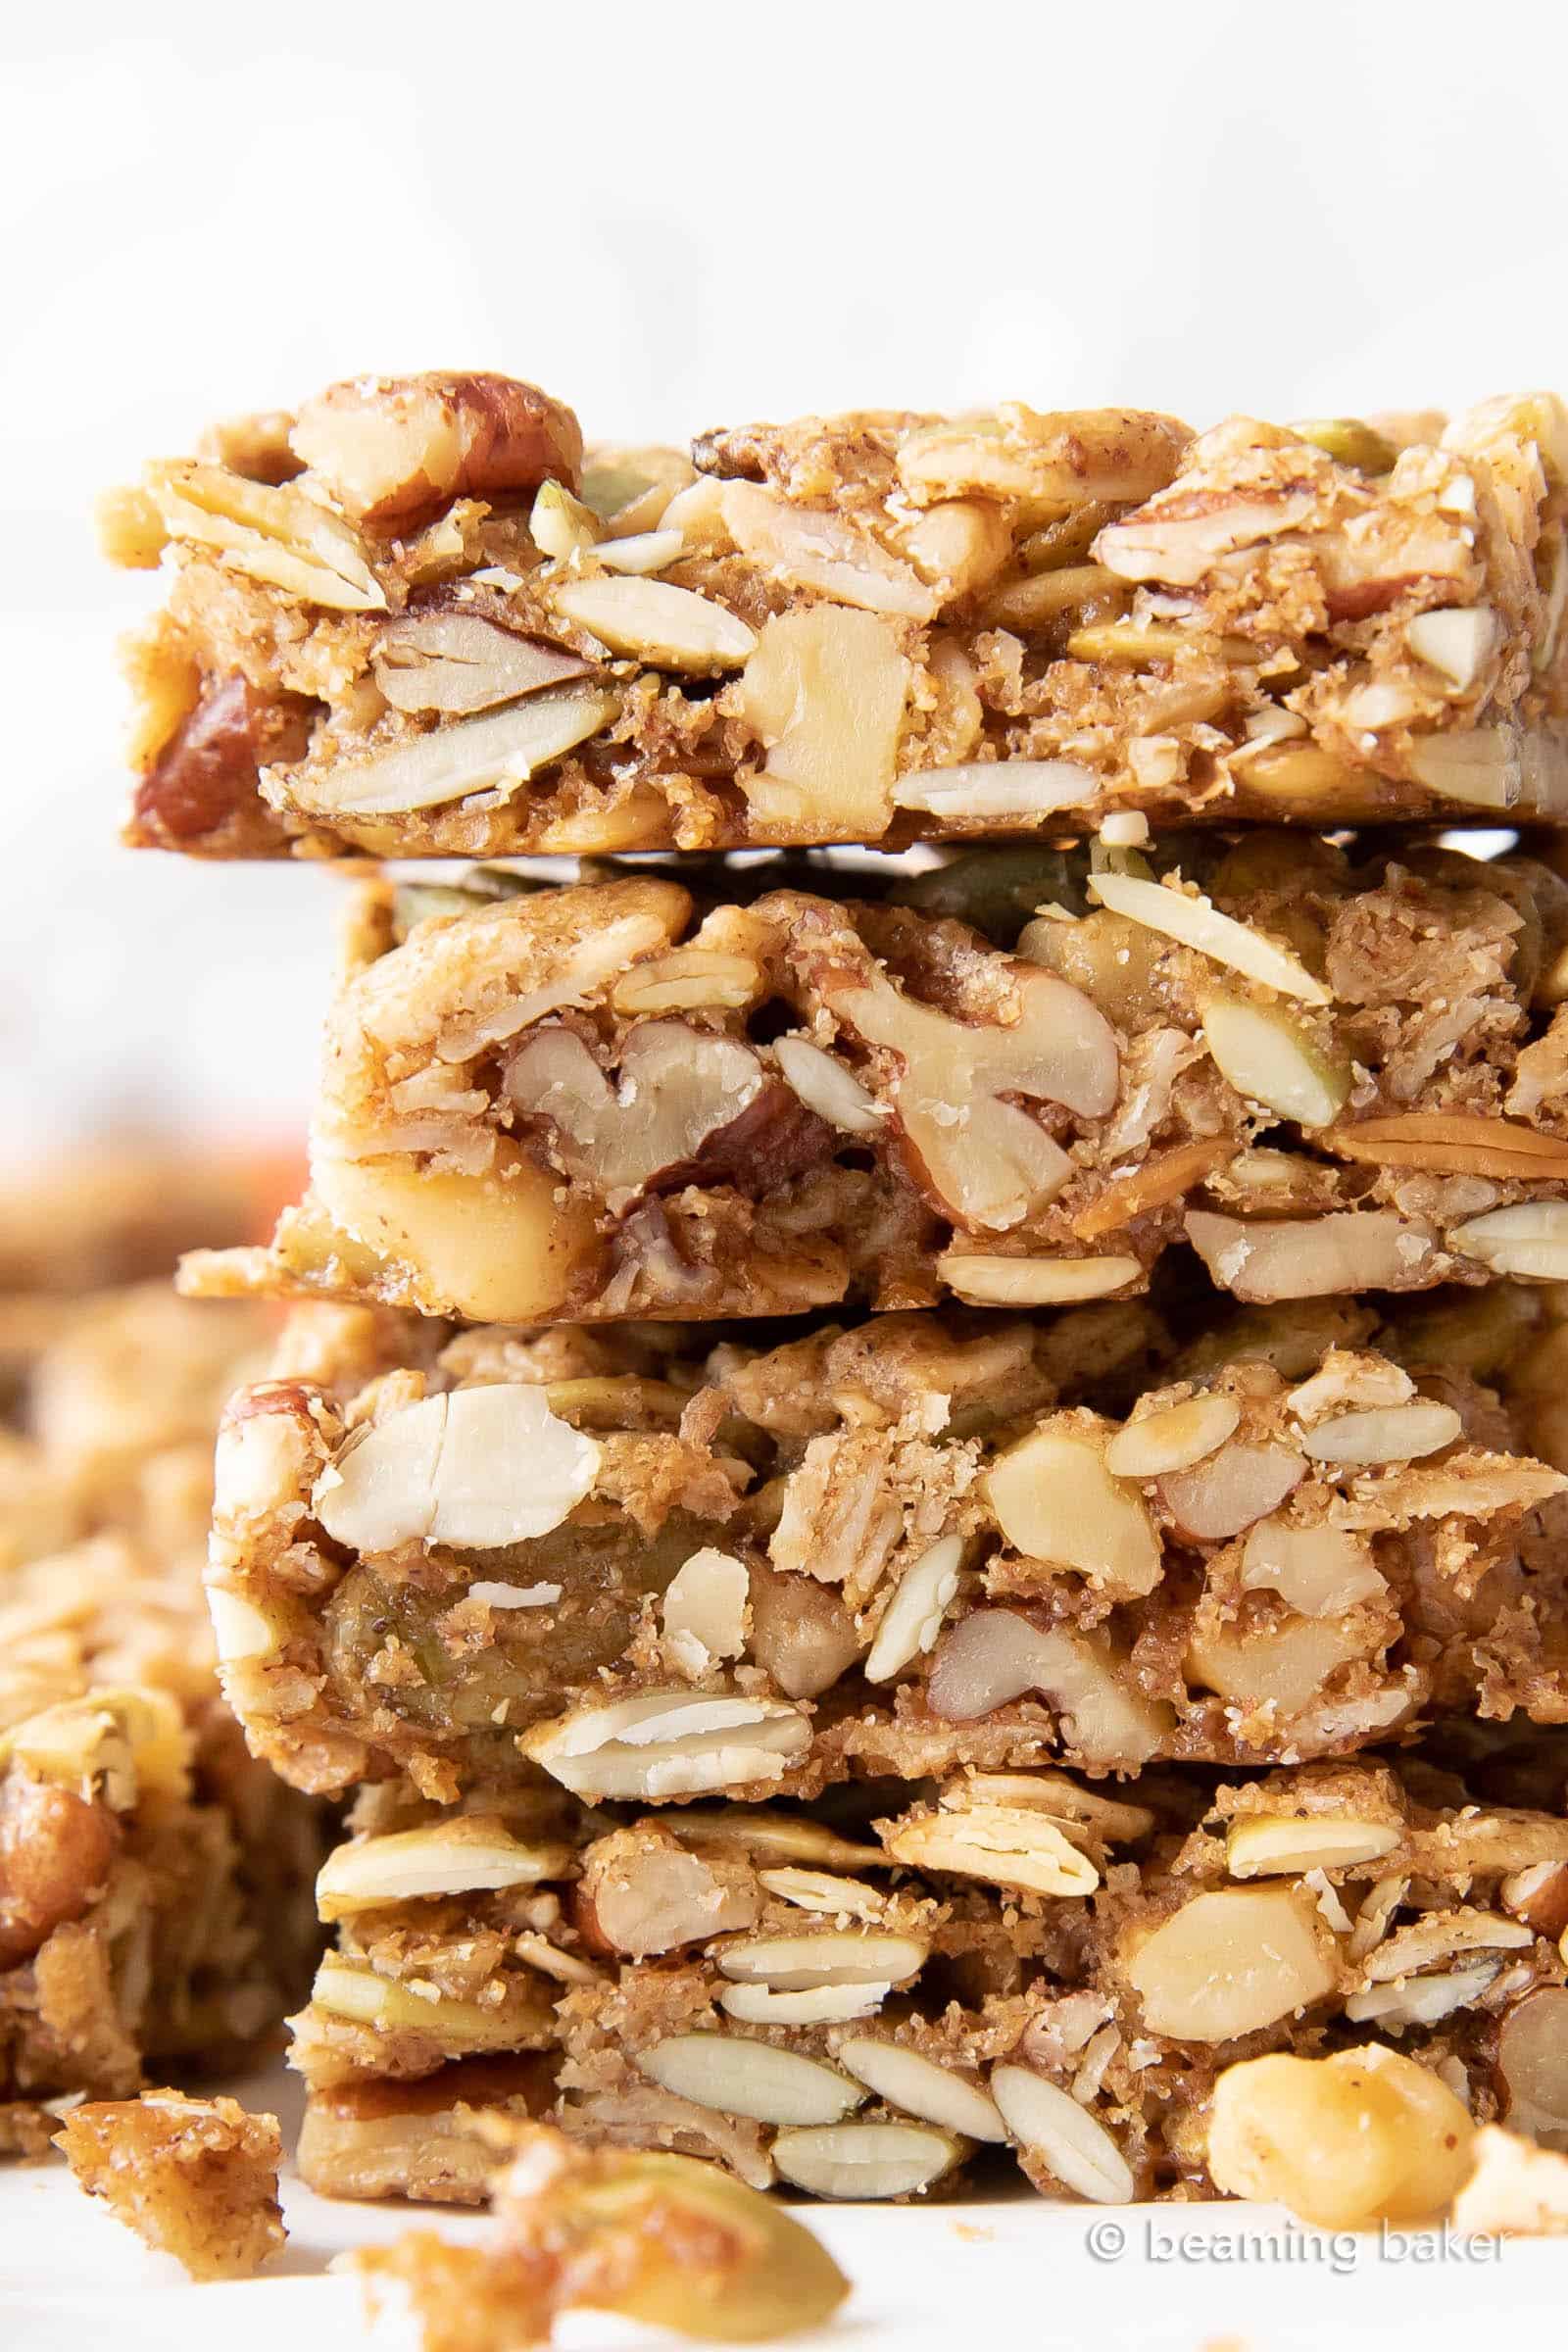 Pumpkin Spice Granola Bars: learn how to make healthy granola bars with a fall-inspired twist! Pumpkin seeds, pumpkin spice and everything nice & healthy in these homemade granola bars. #Pumpkin #Healthy #GranolaBars #PumpkinSpice | Recipe at BeamingBaker.com